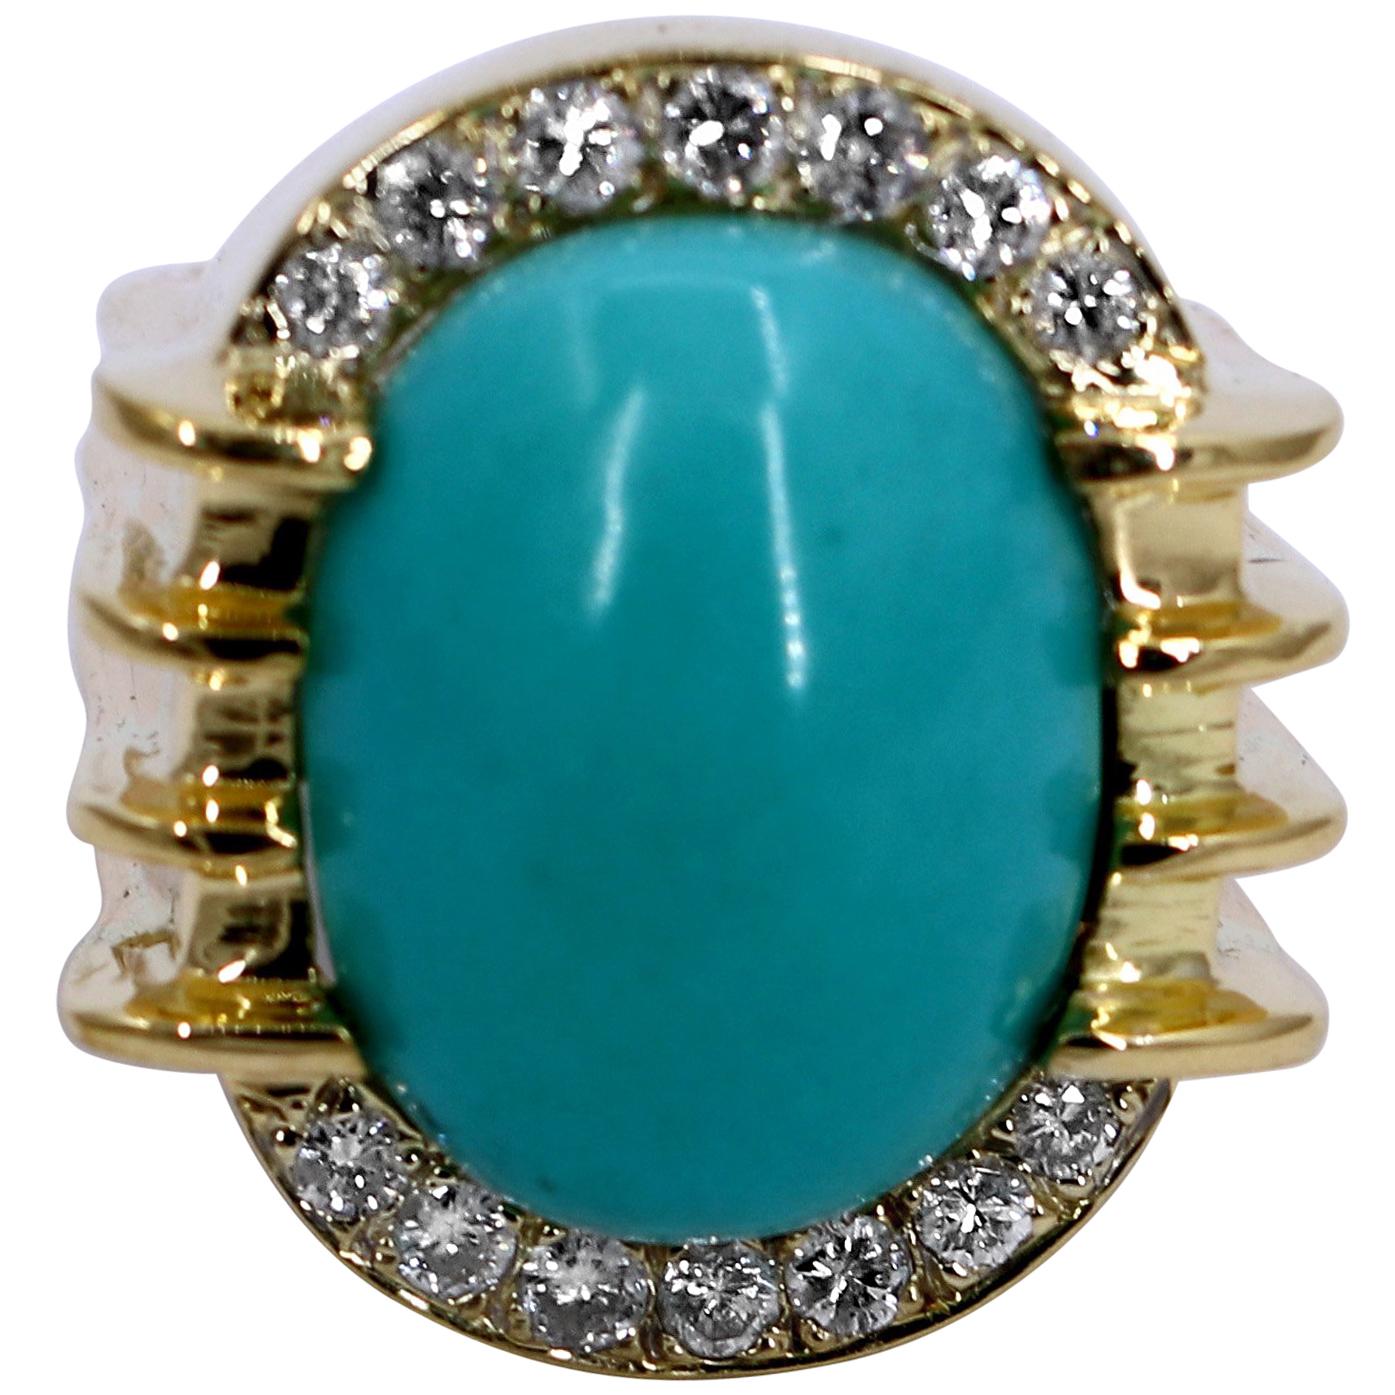 Classic Styled Gold Ring with Turquoise and Diamonds